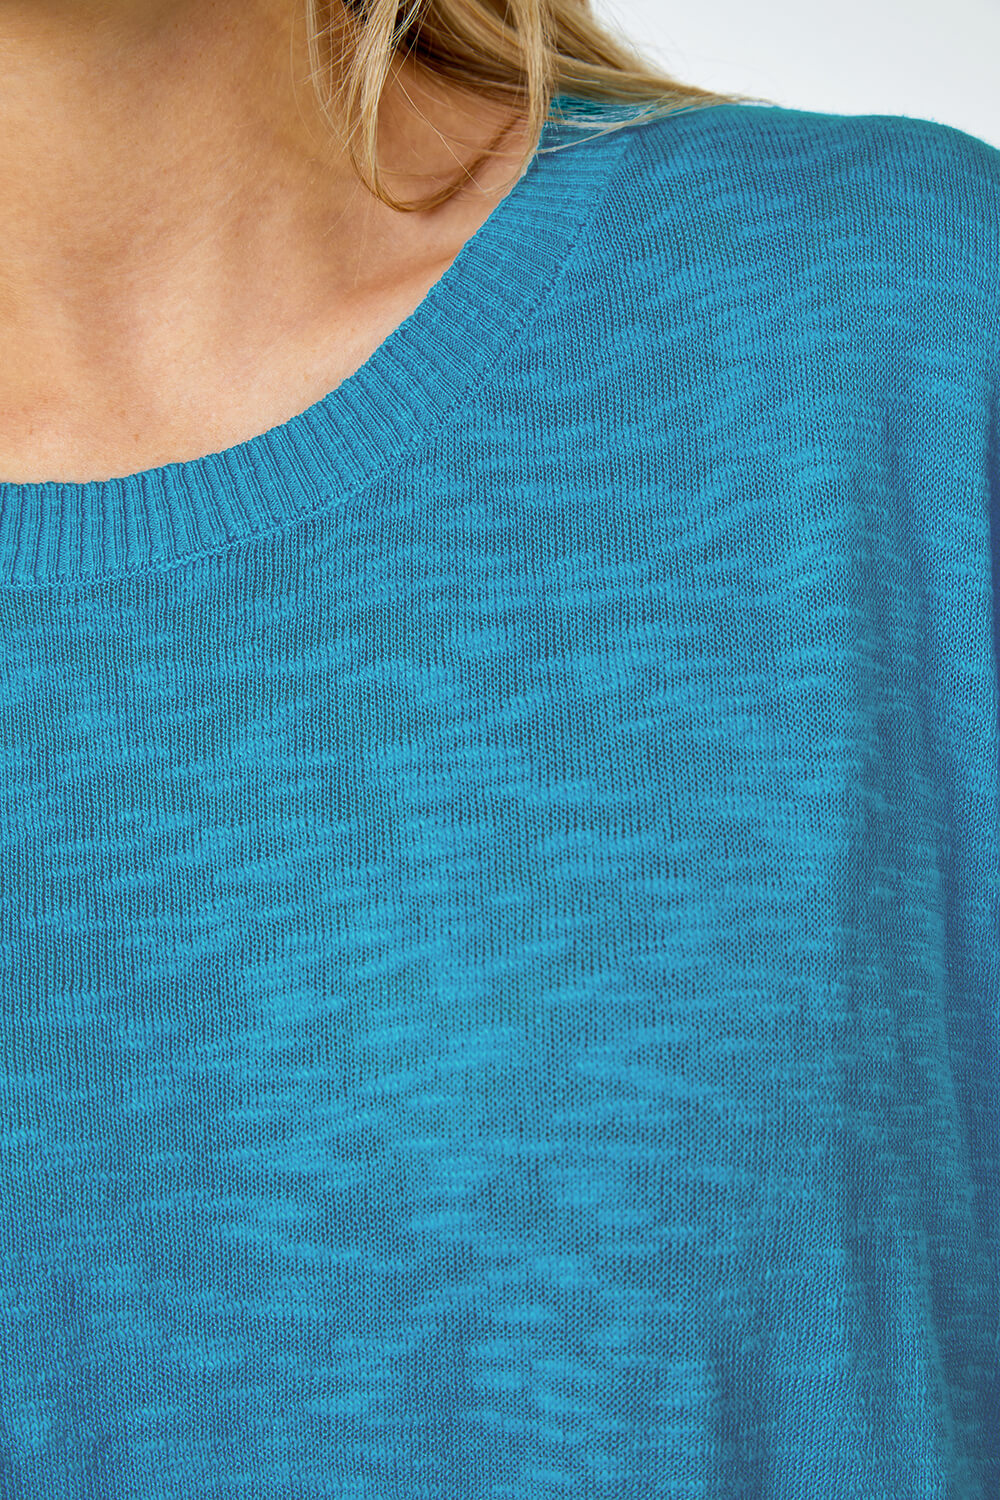 Turquoise Petite Cotton Blend Textured Knit Top, Image 5 of 5